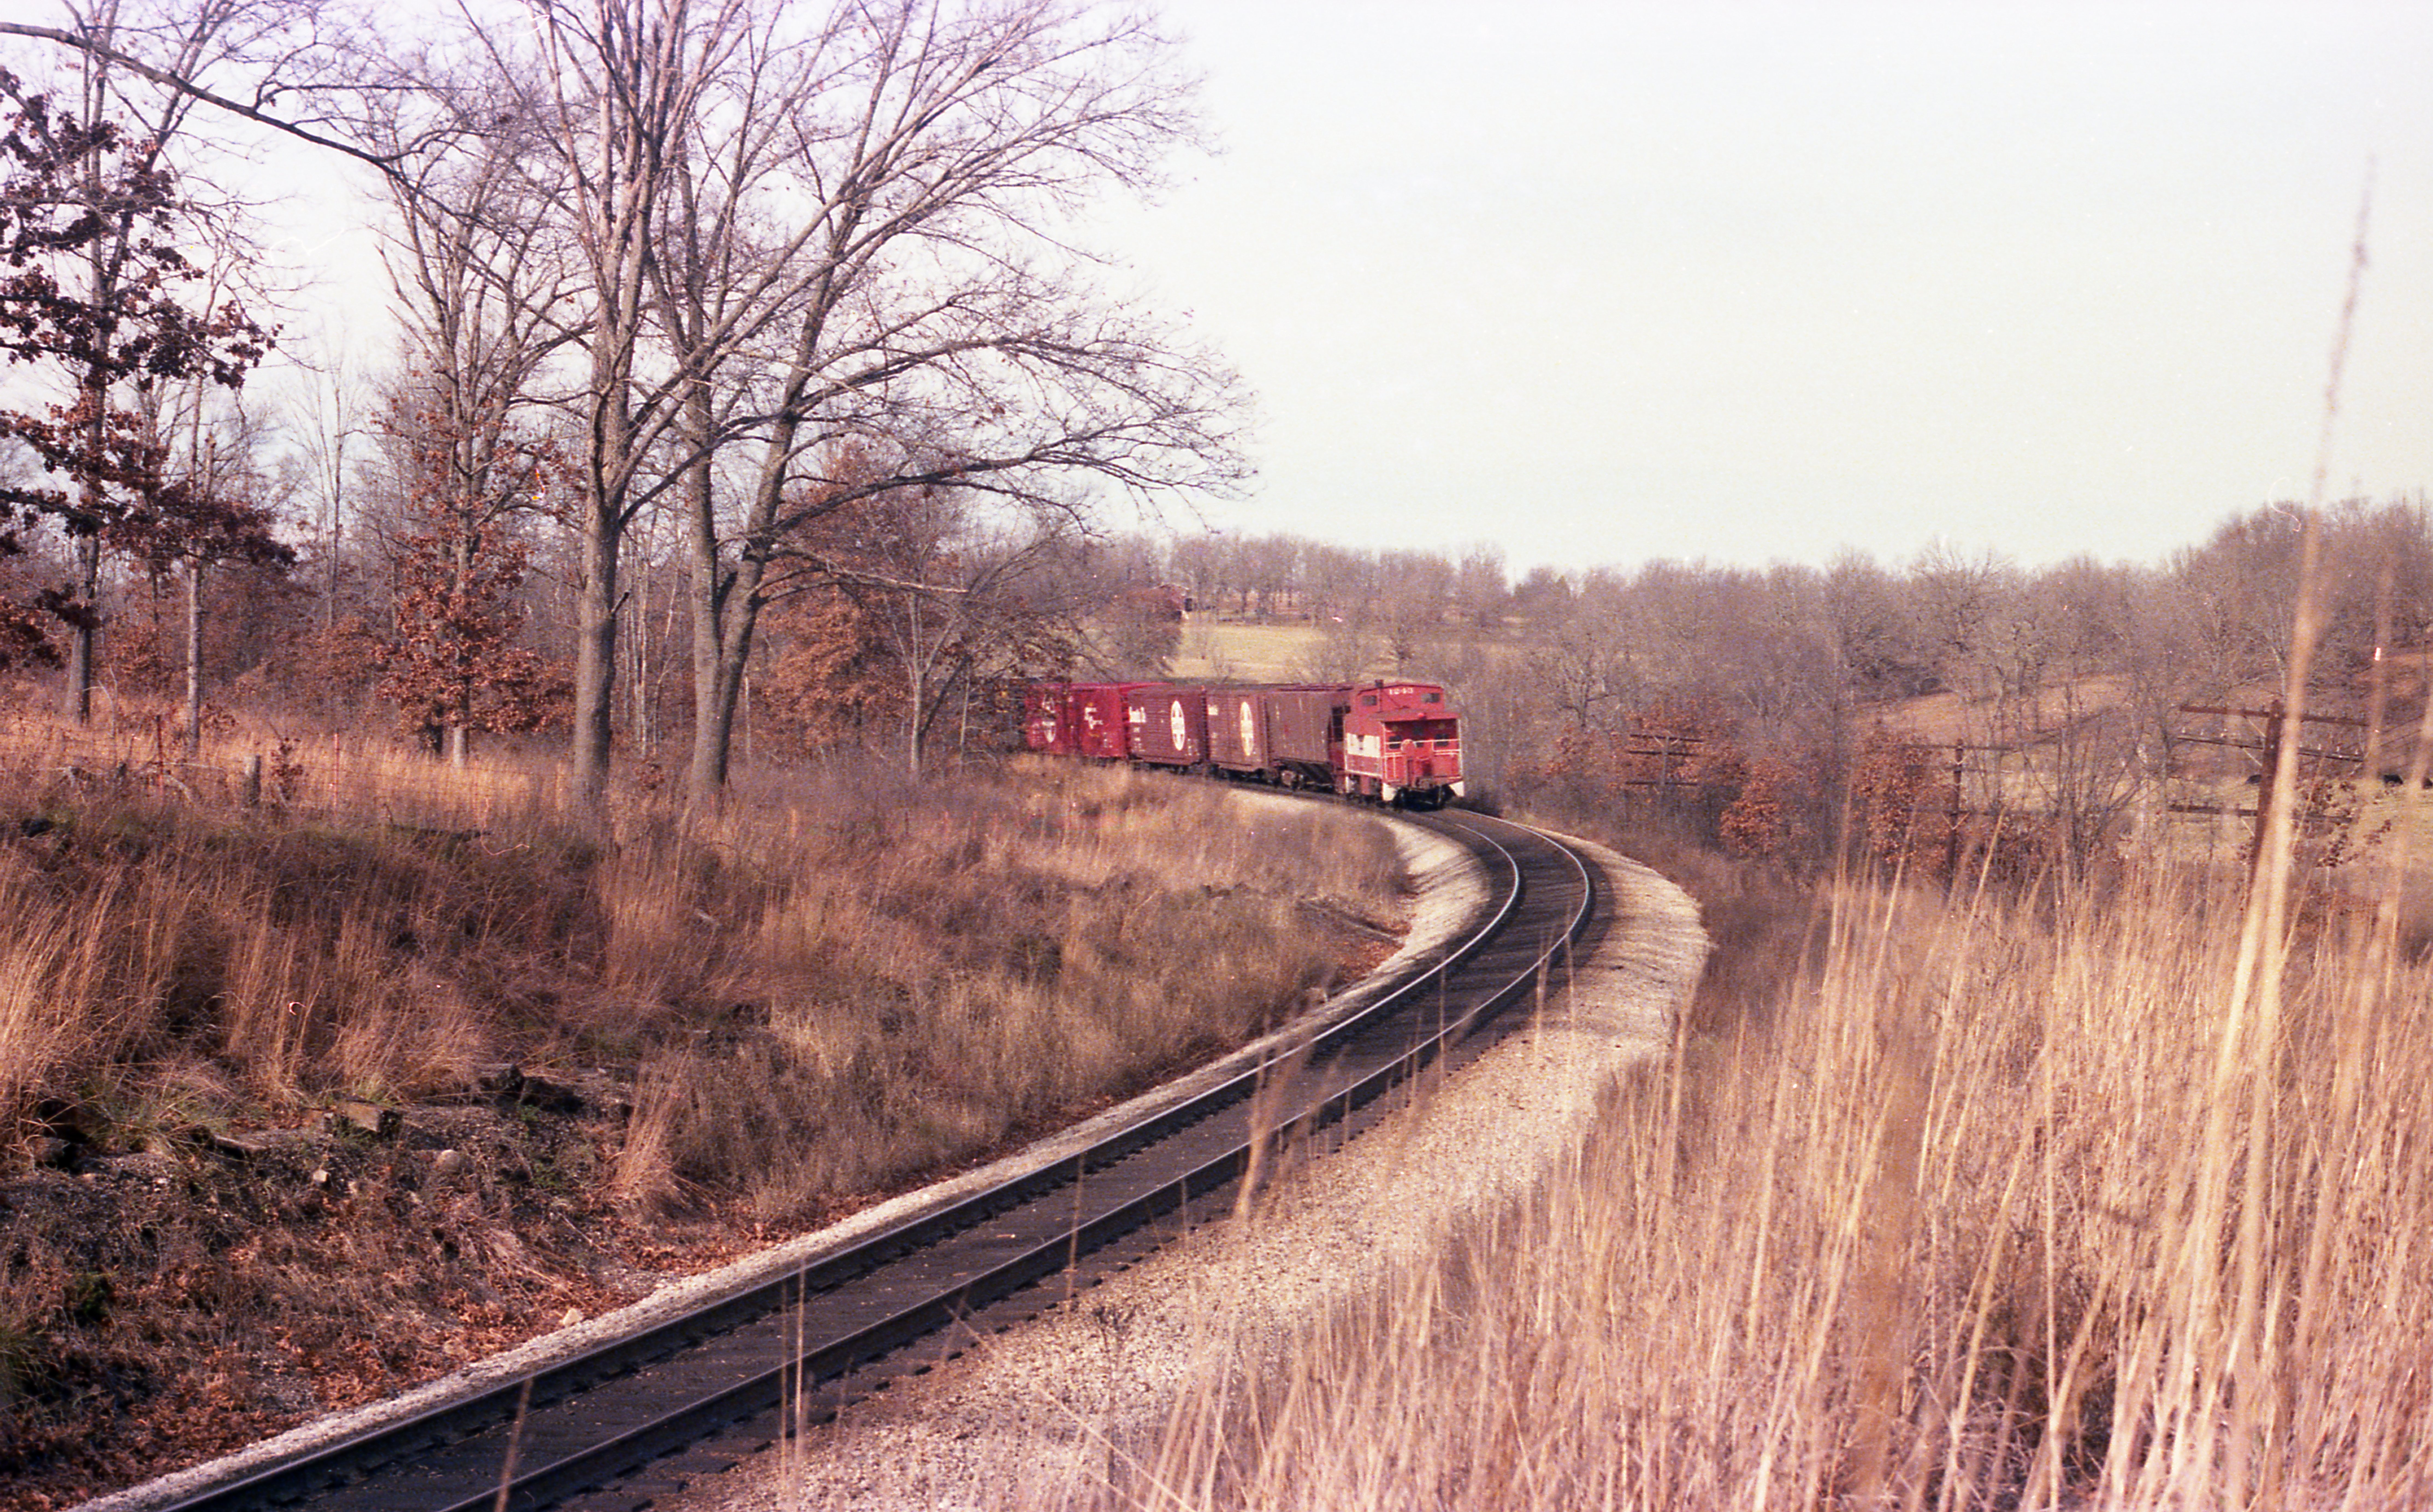 SD45s 922 and 945, and GP35 700 North of Thayer, Missouri on November 24, 1979 (R.R. Taylor)